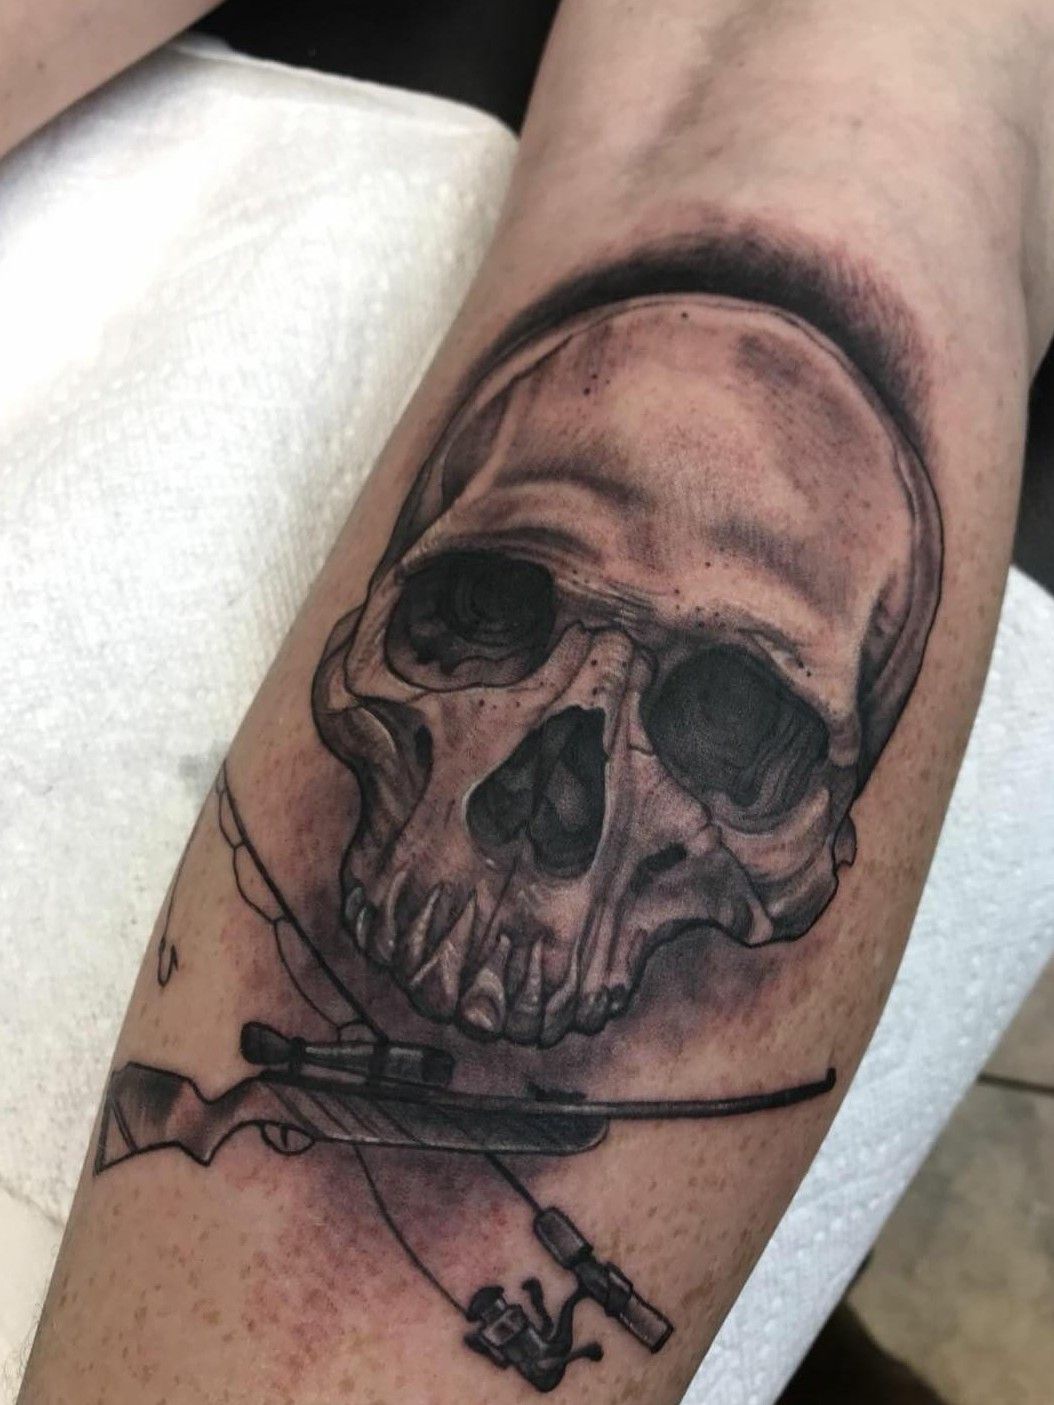 Tattoo uploaded by Madog561 • Second overall piece first on my leg Its a  skull and cross bones with a fishing pole and a rifle as the bones •  Tattoodo